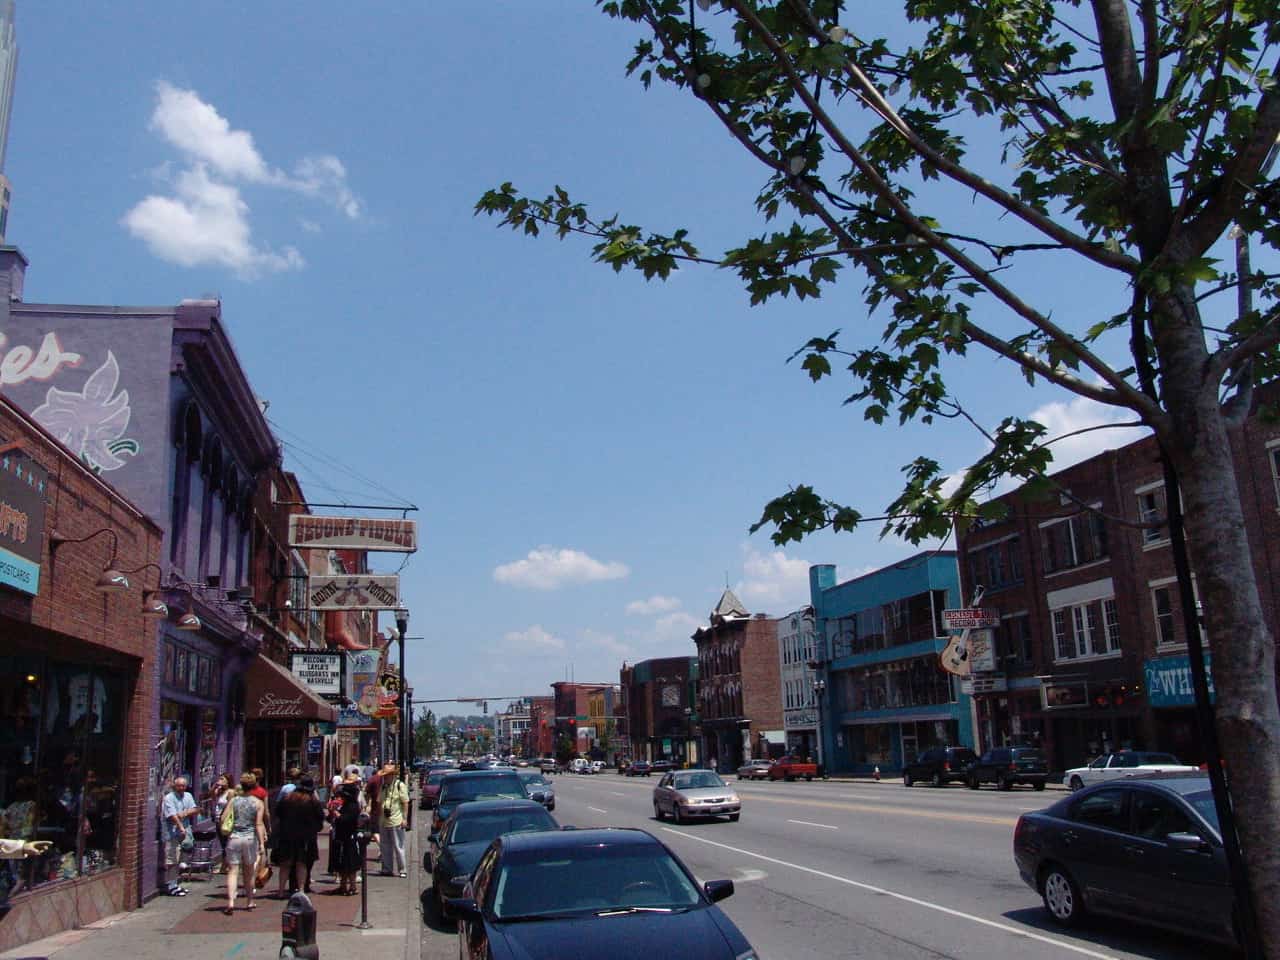 Lower Broadway in 2006 in Nashville, Tennessee